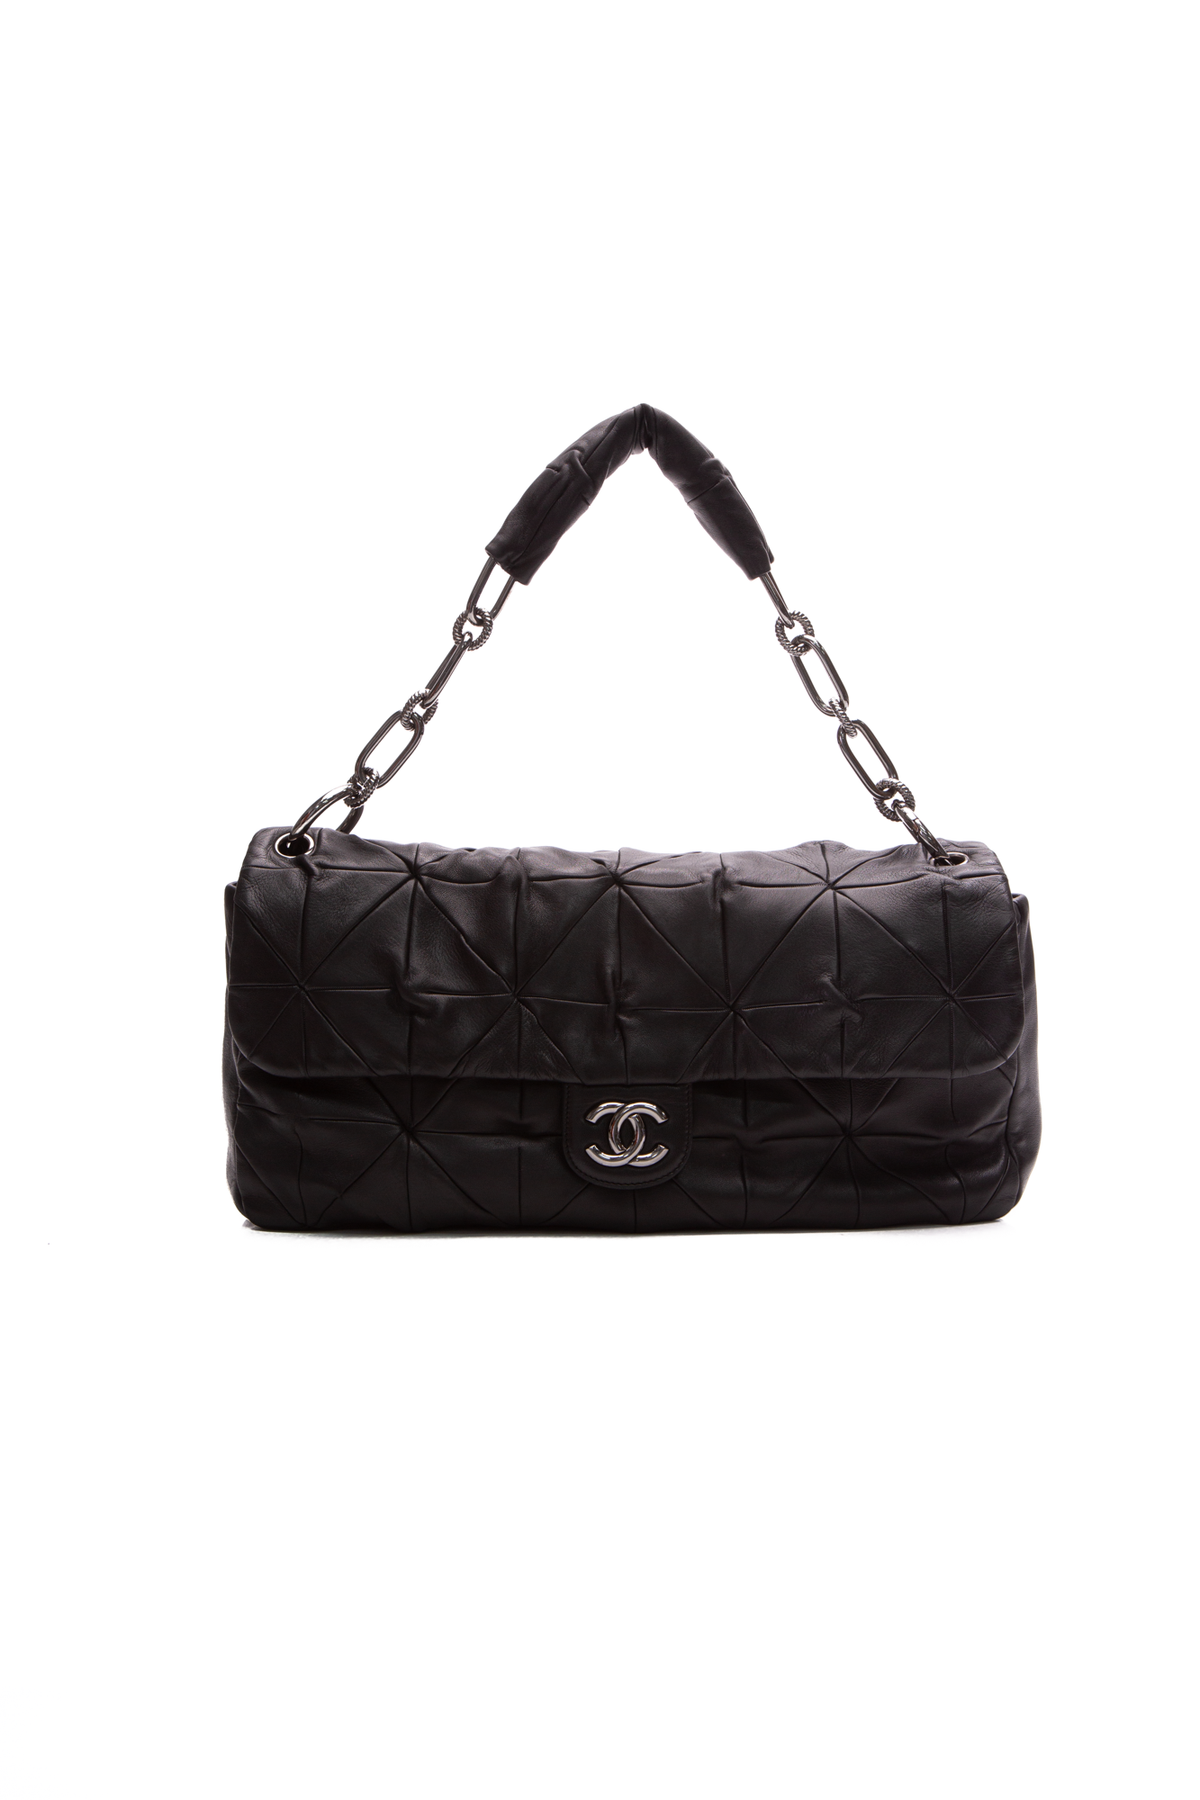 Chanel Origami Flap Bag - Couture USA